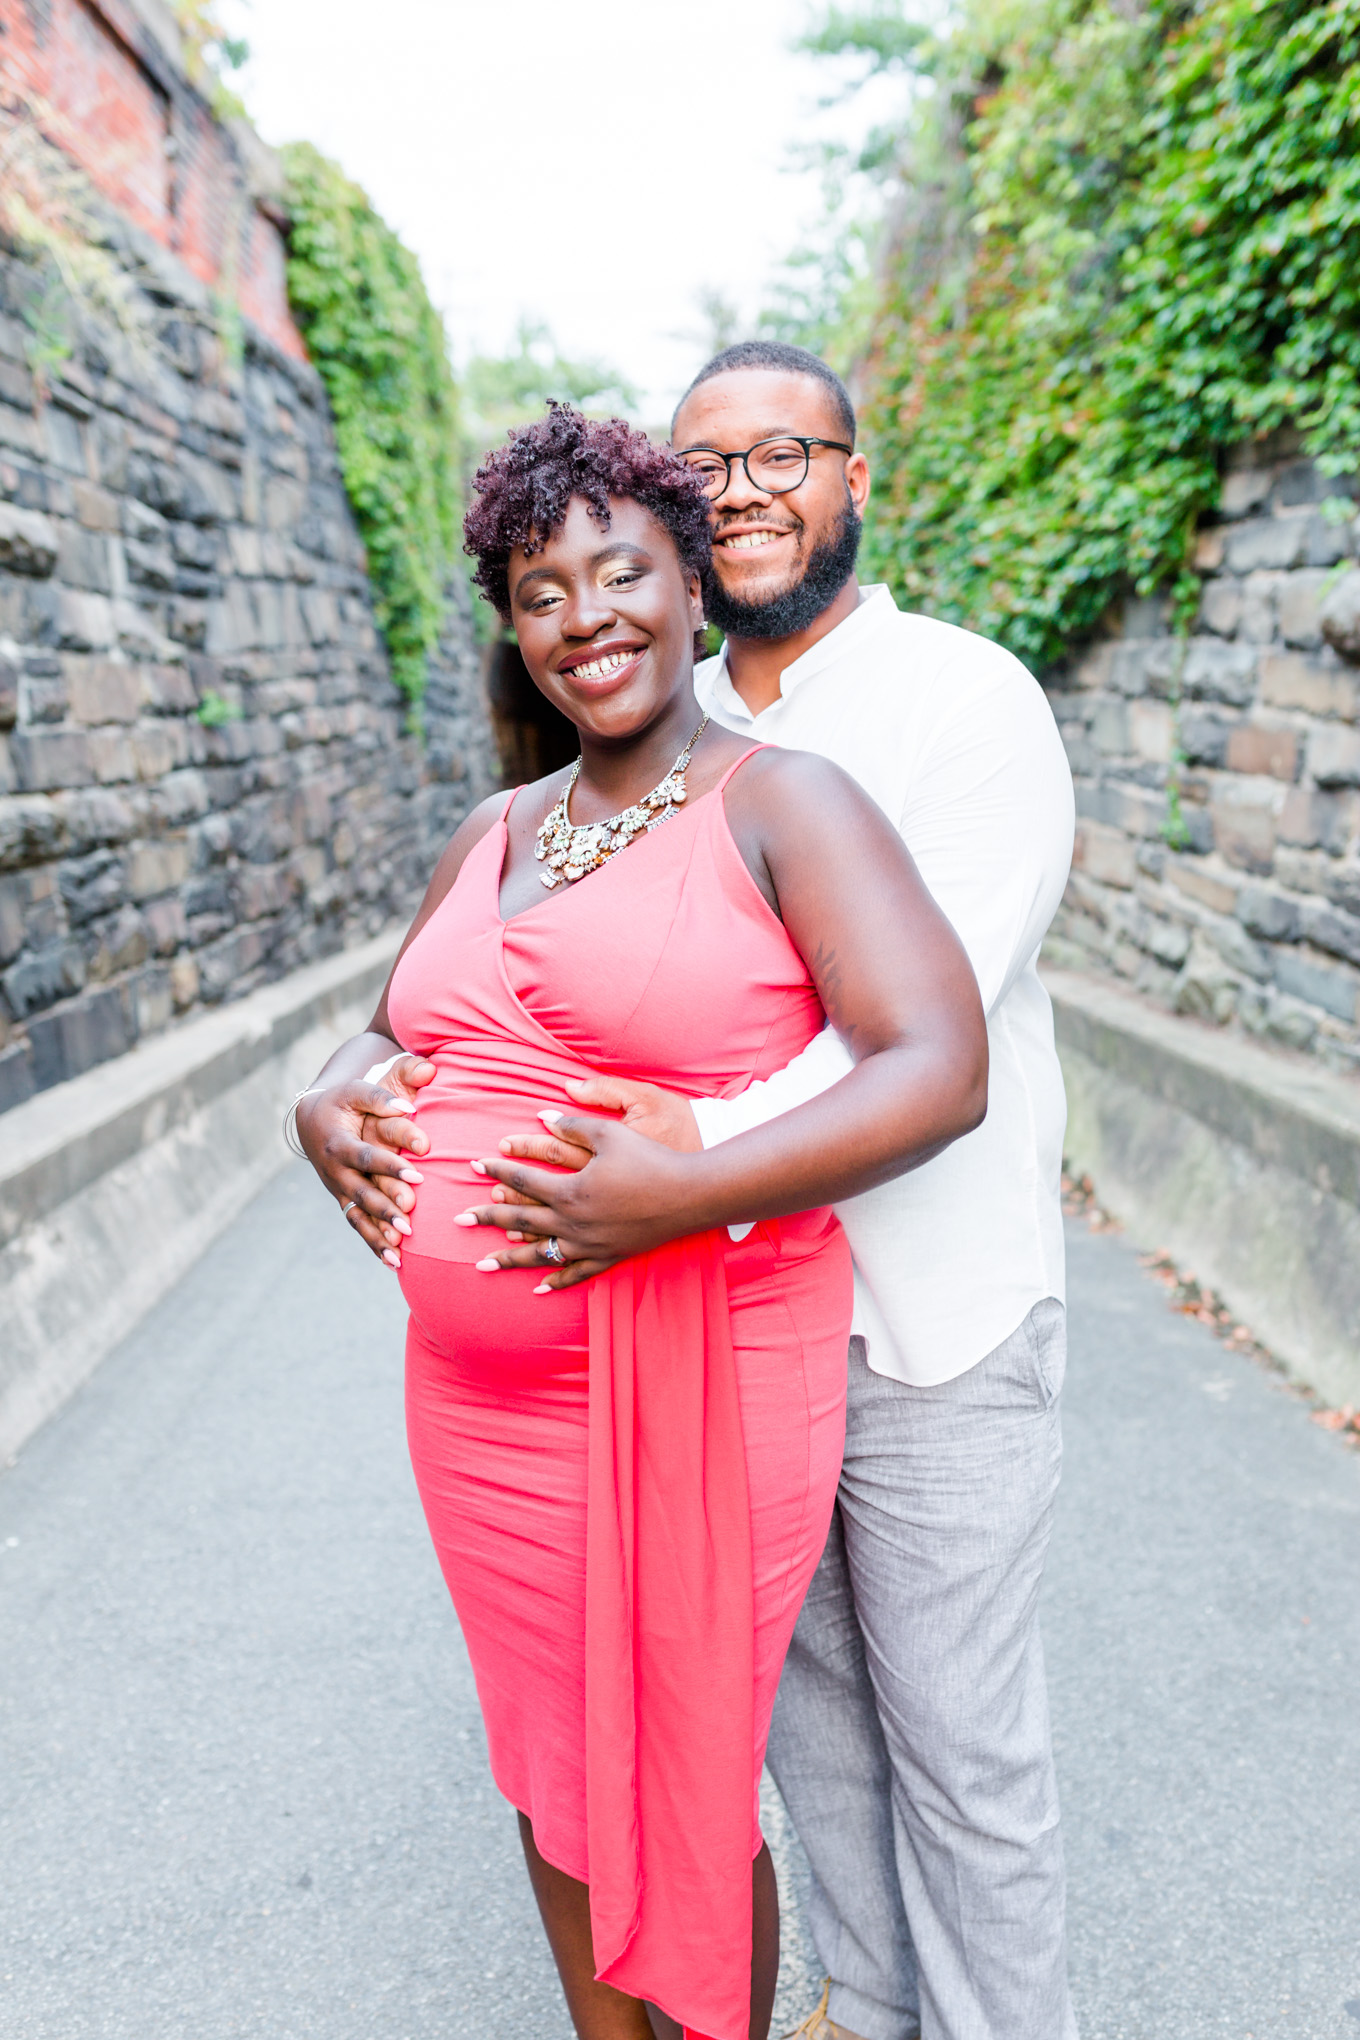 photo shoot style ideas, photo shoot style, photo shoot fashion, style ideas, style guide, photo shoot style guide, maternity photos, expecting couple, Wilkes Street Tunnel